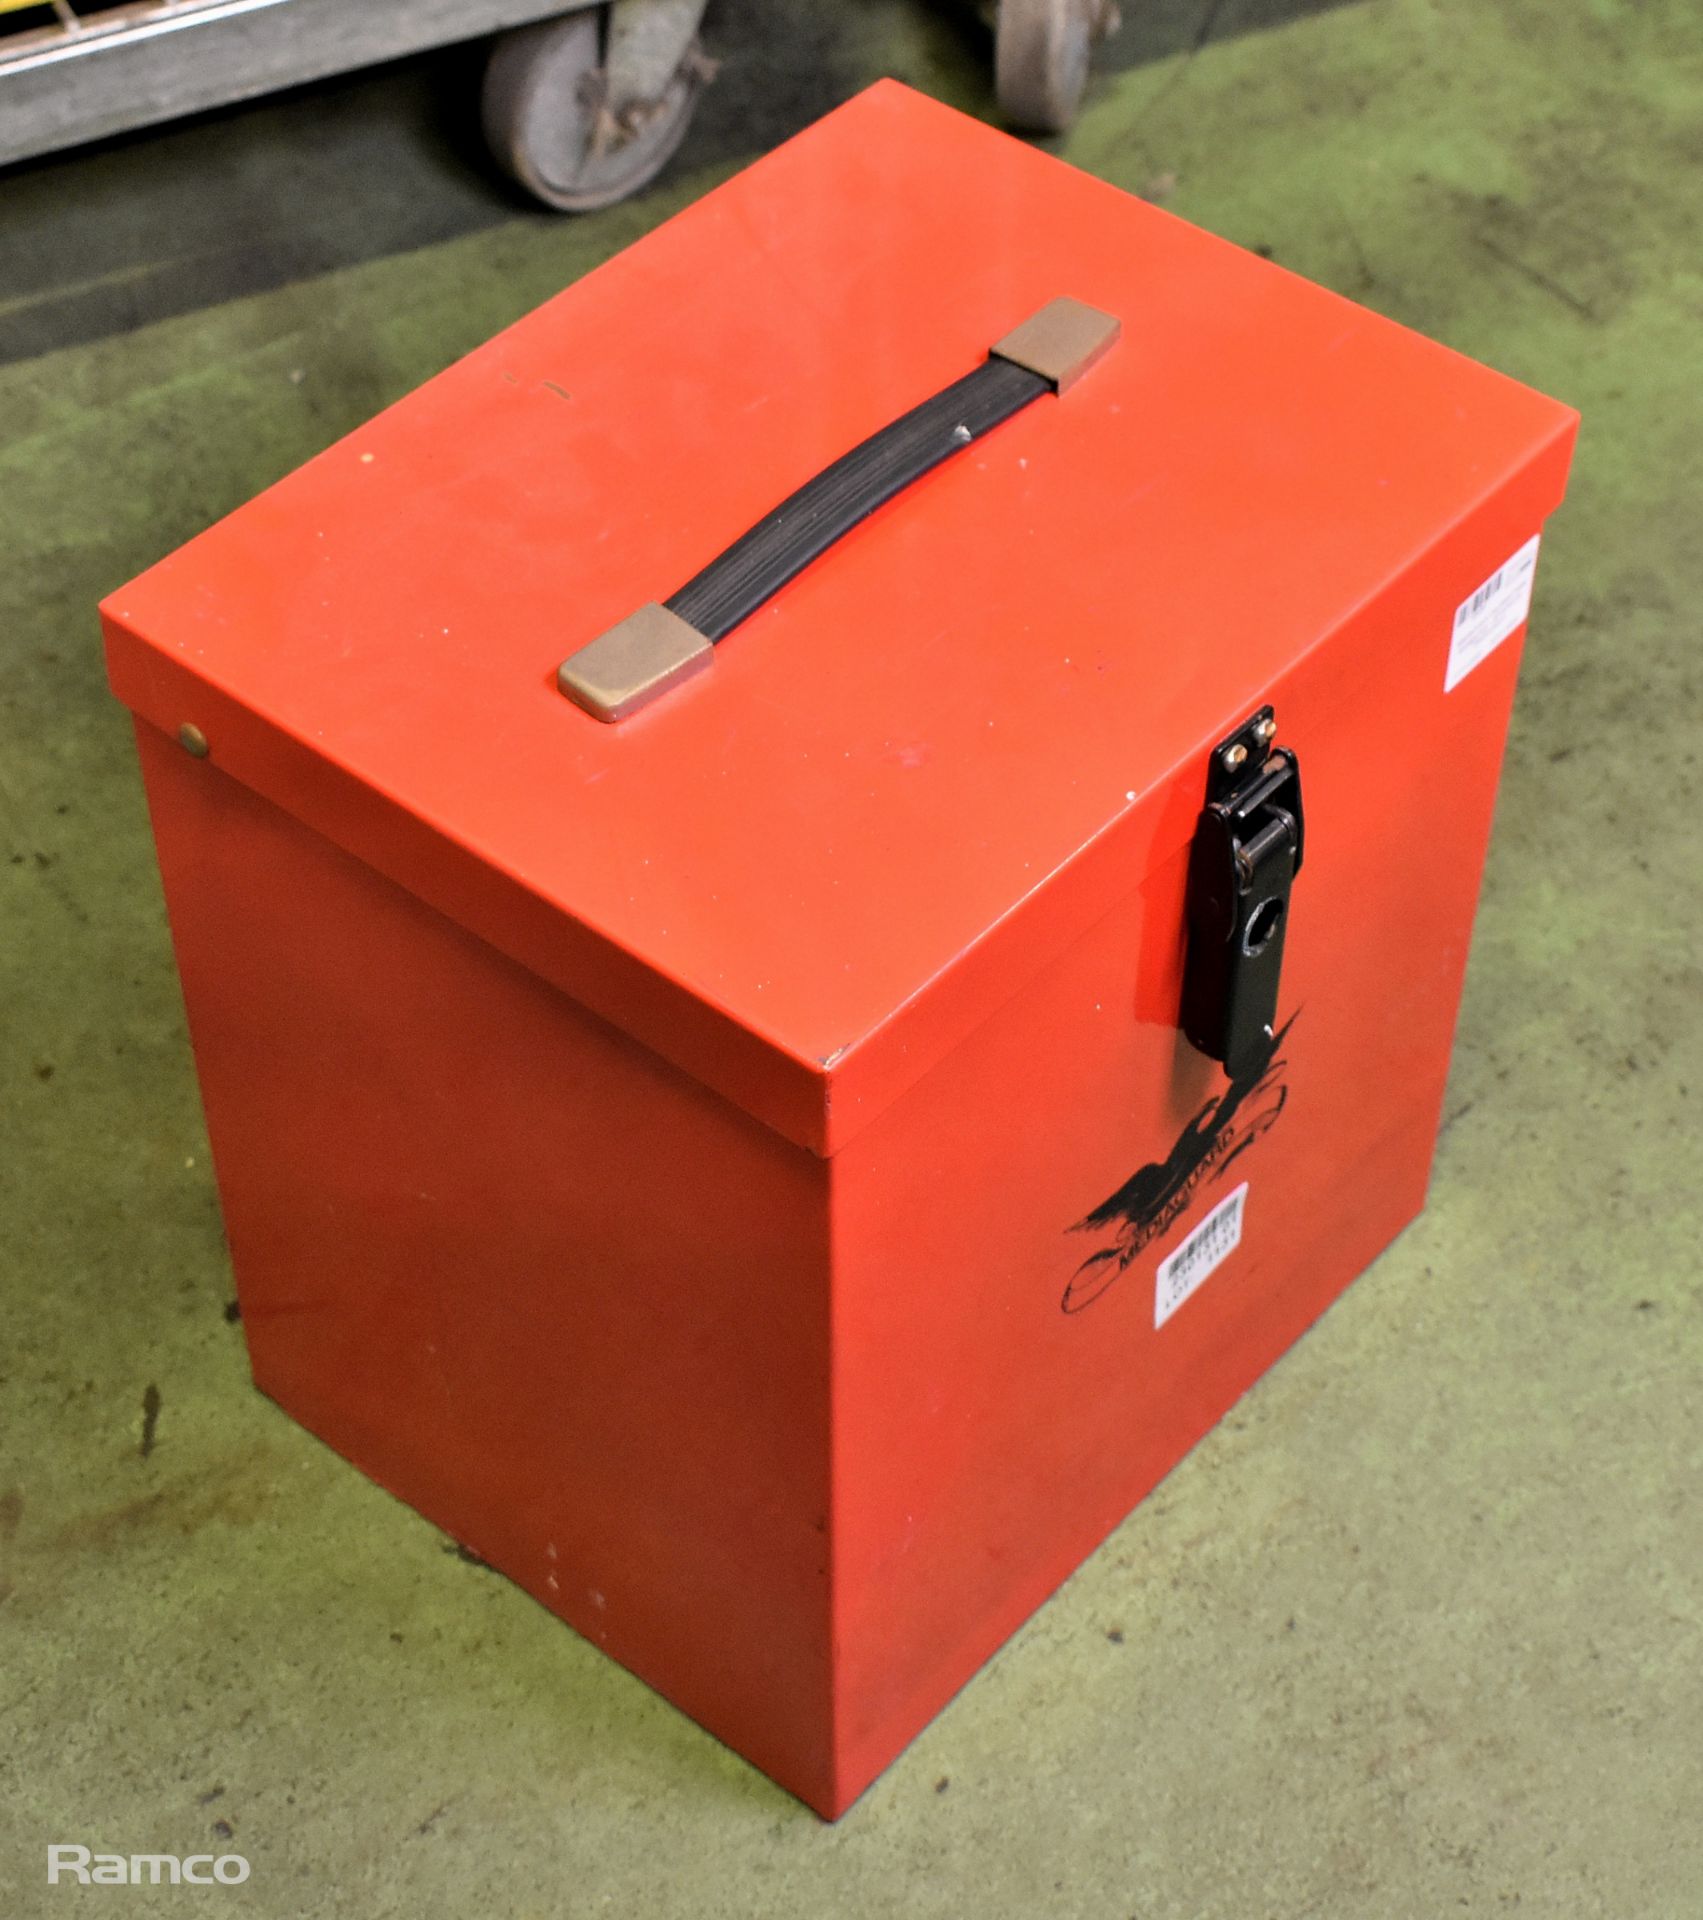 MediaGuard insulated metal storage box - dimensions: 38 x 30 x 40cm - Image 3 of 3